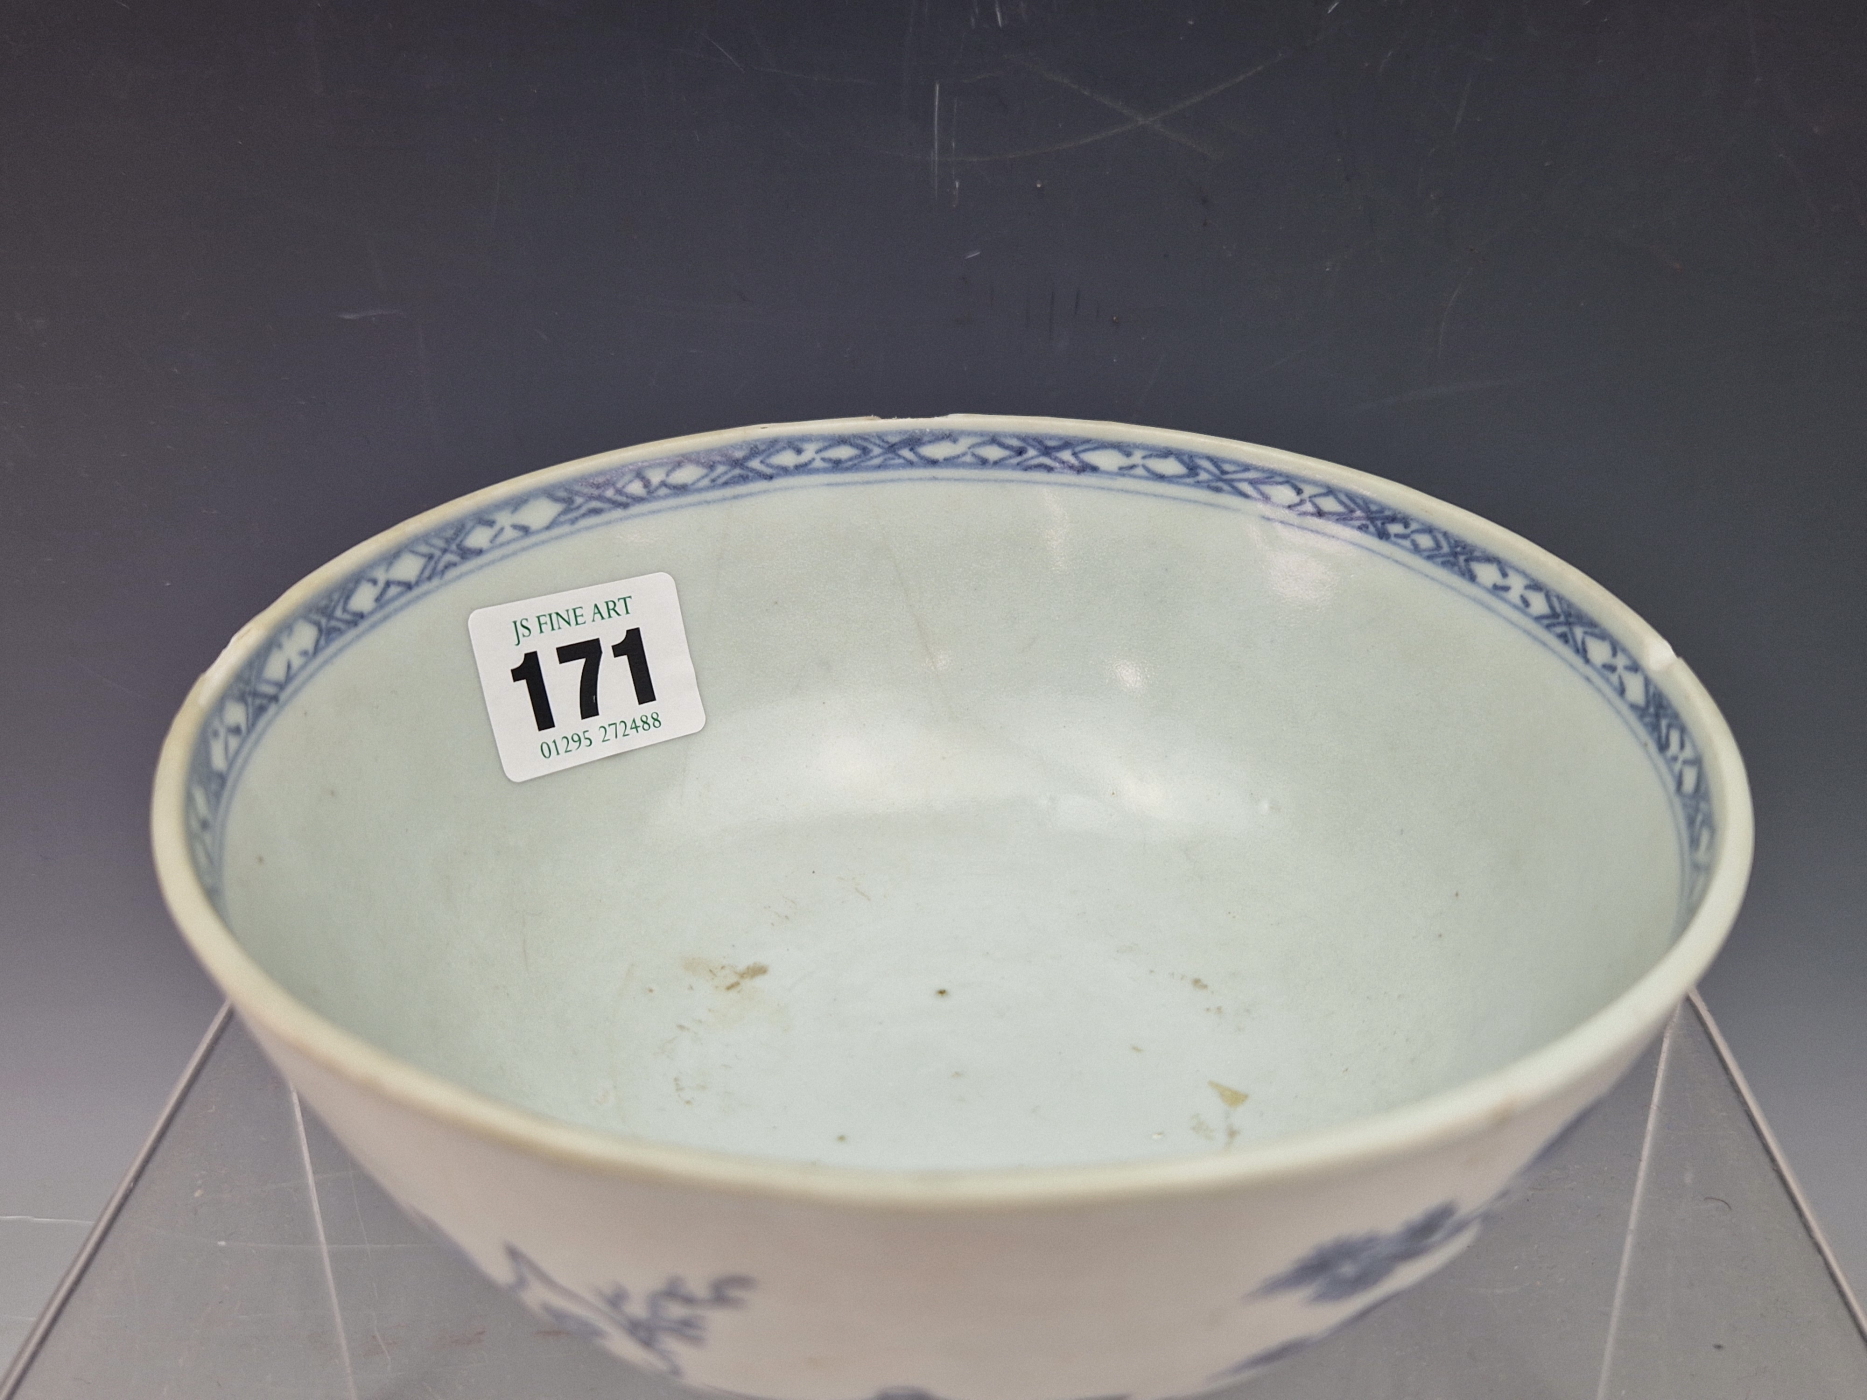 A NANKING CARGO BLUE AND WHITE BOWL, THE EXTERIOR PAINTED WITH ISLANDS, CHRISTIES LABEL FOR LOT - Image 2 of 4